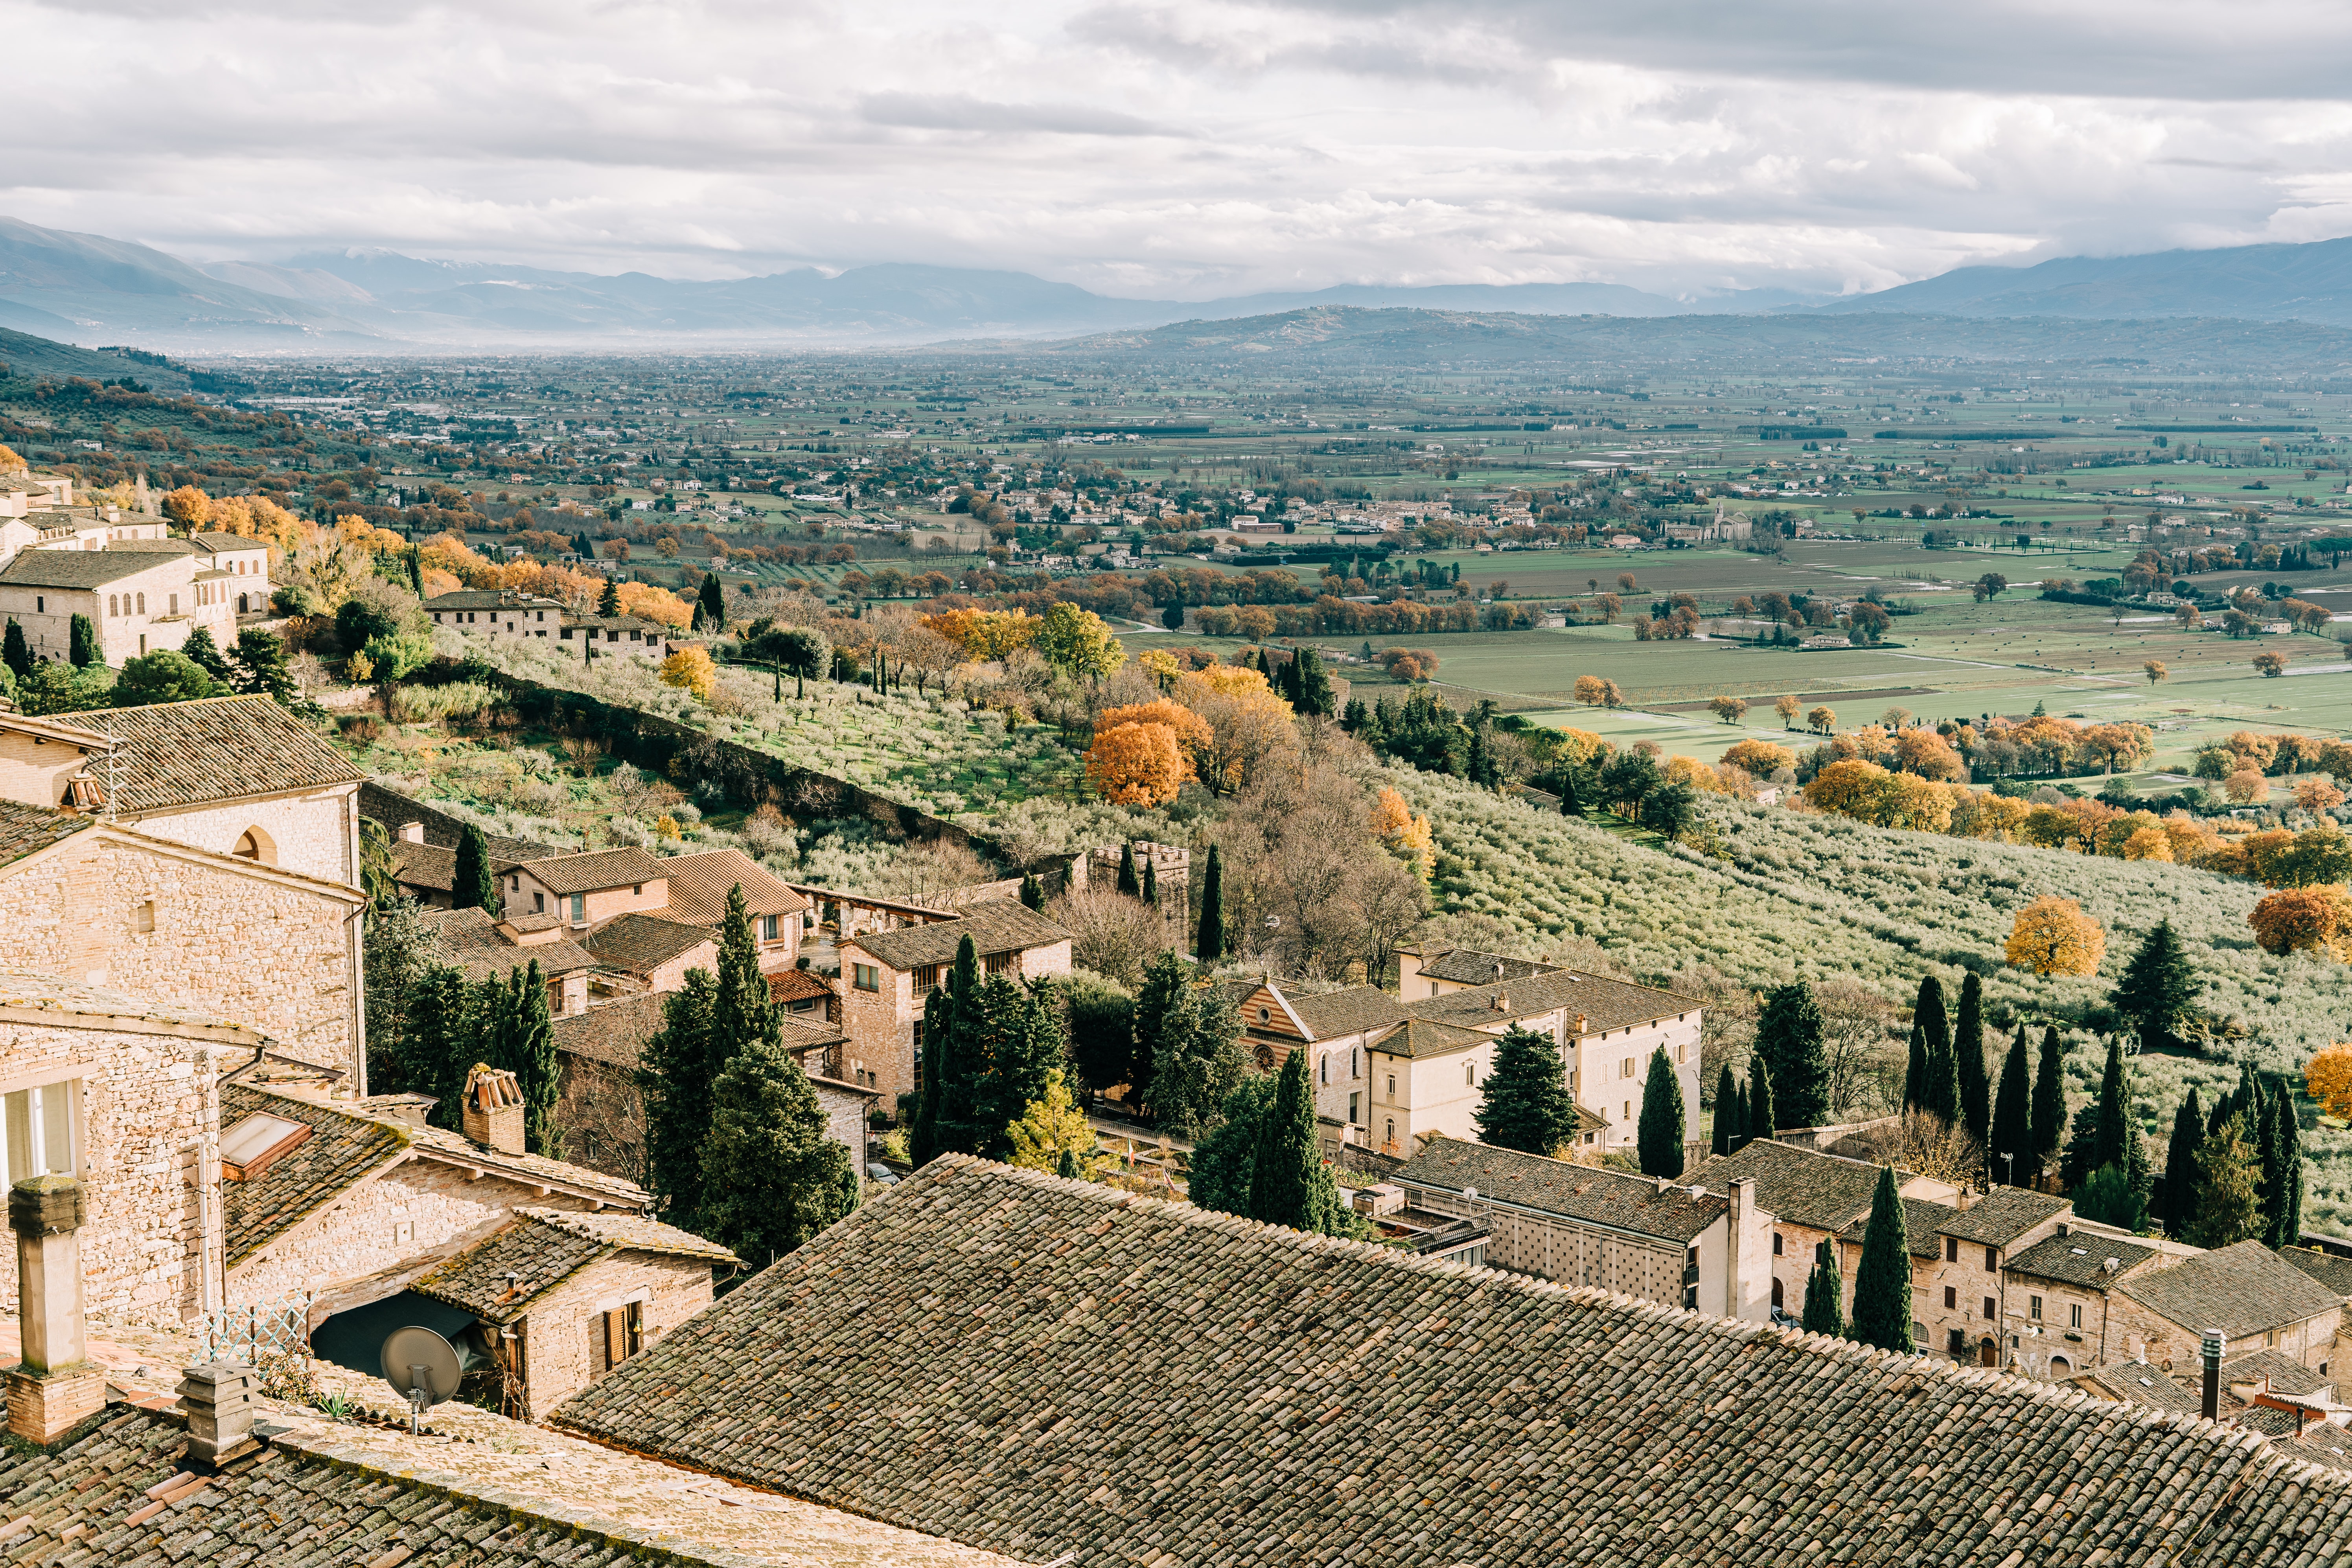 What To See and Do in Umbria: Our Top Picks